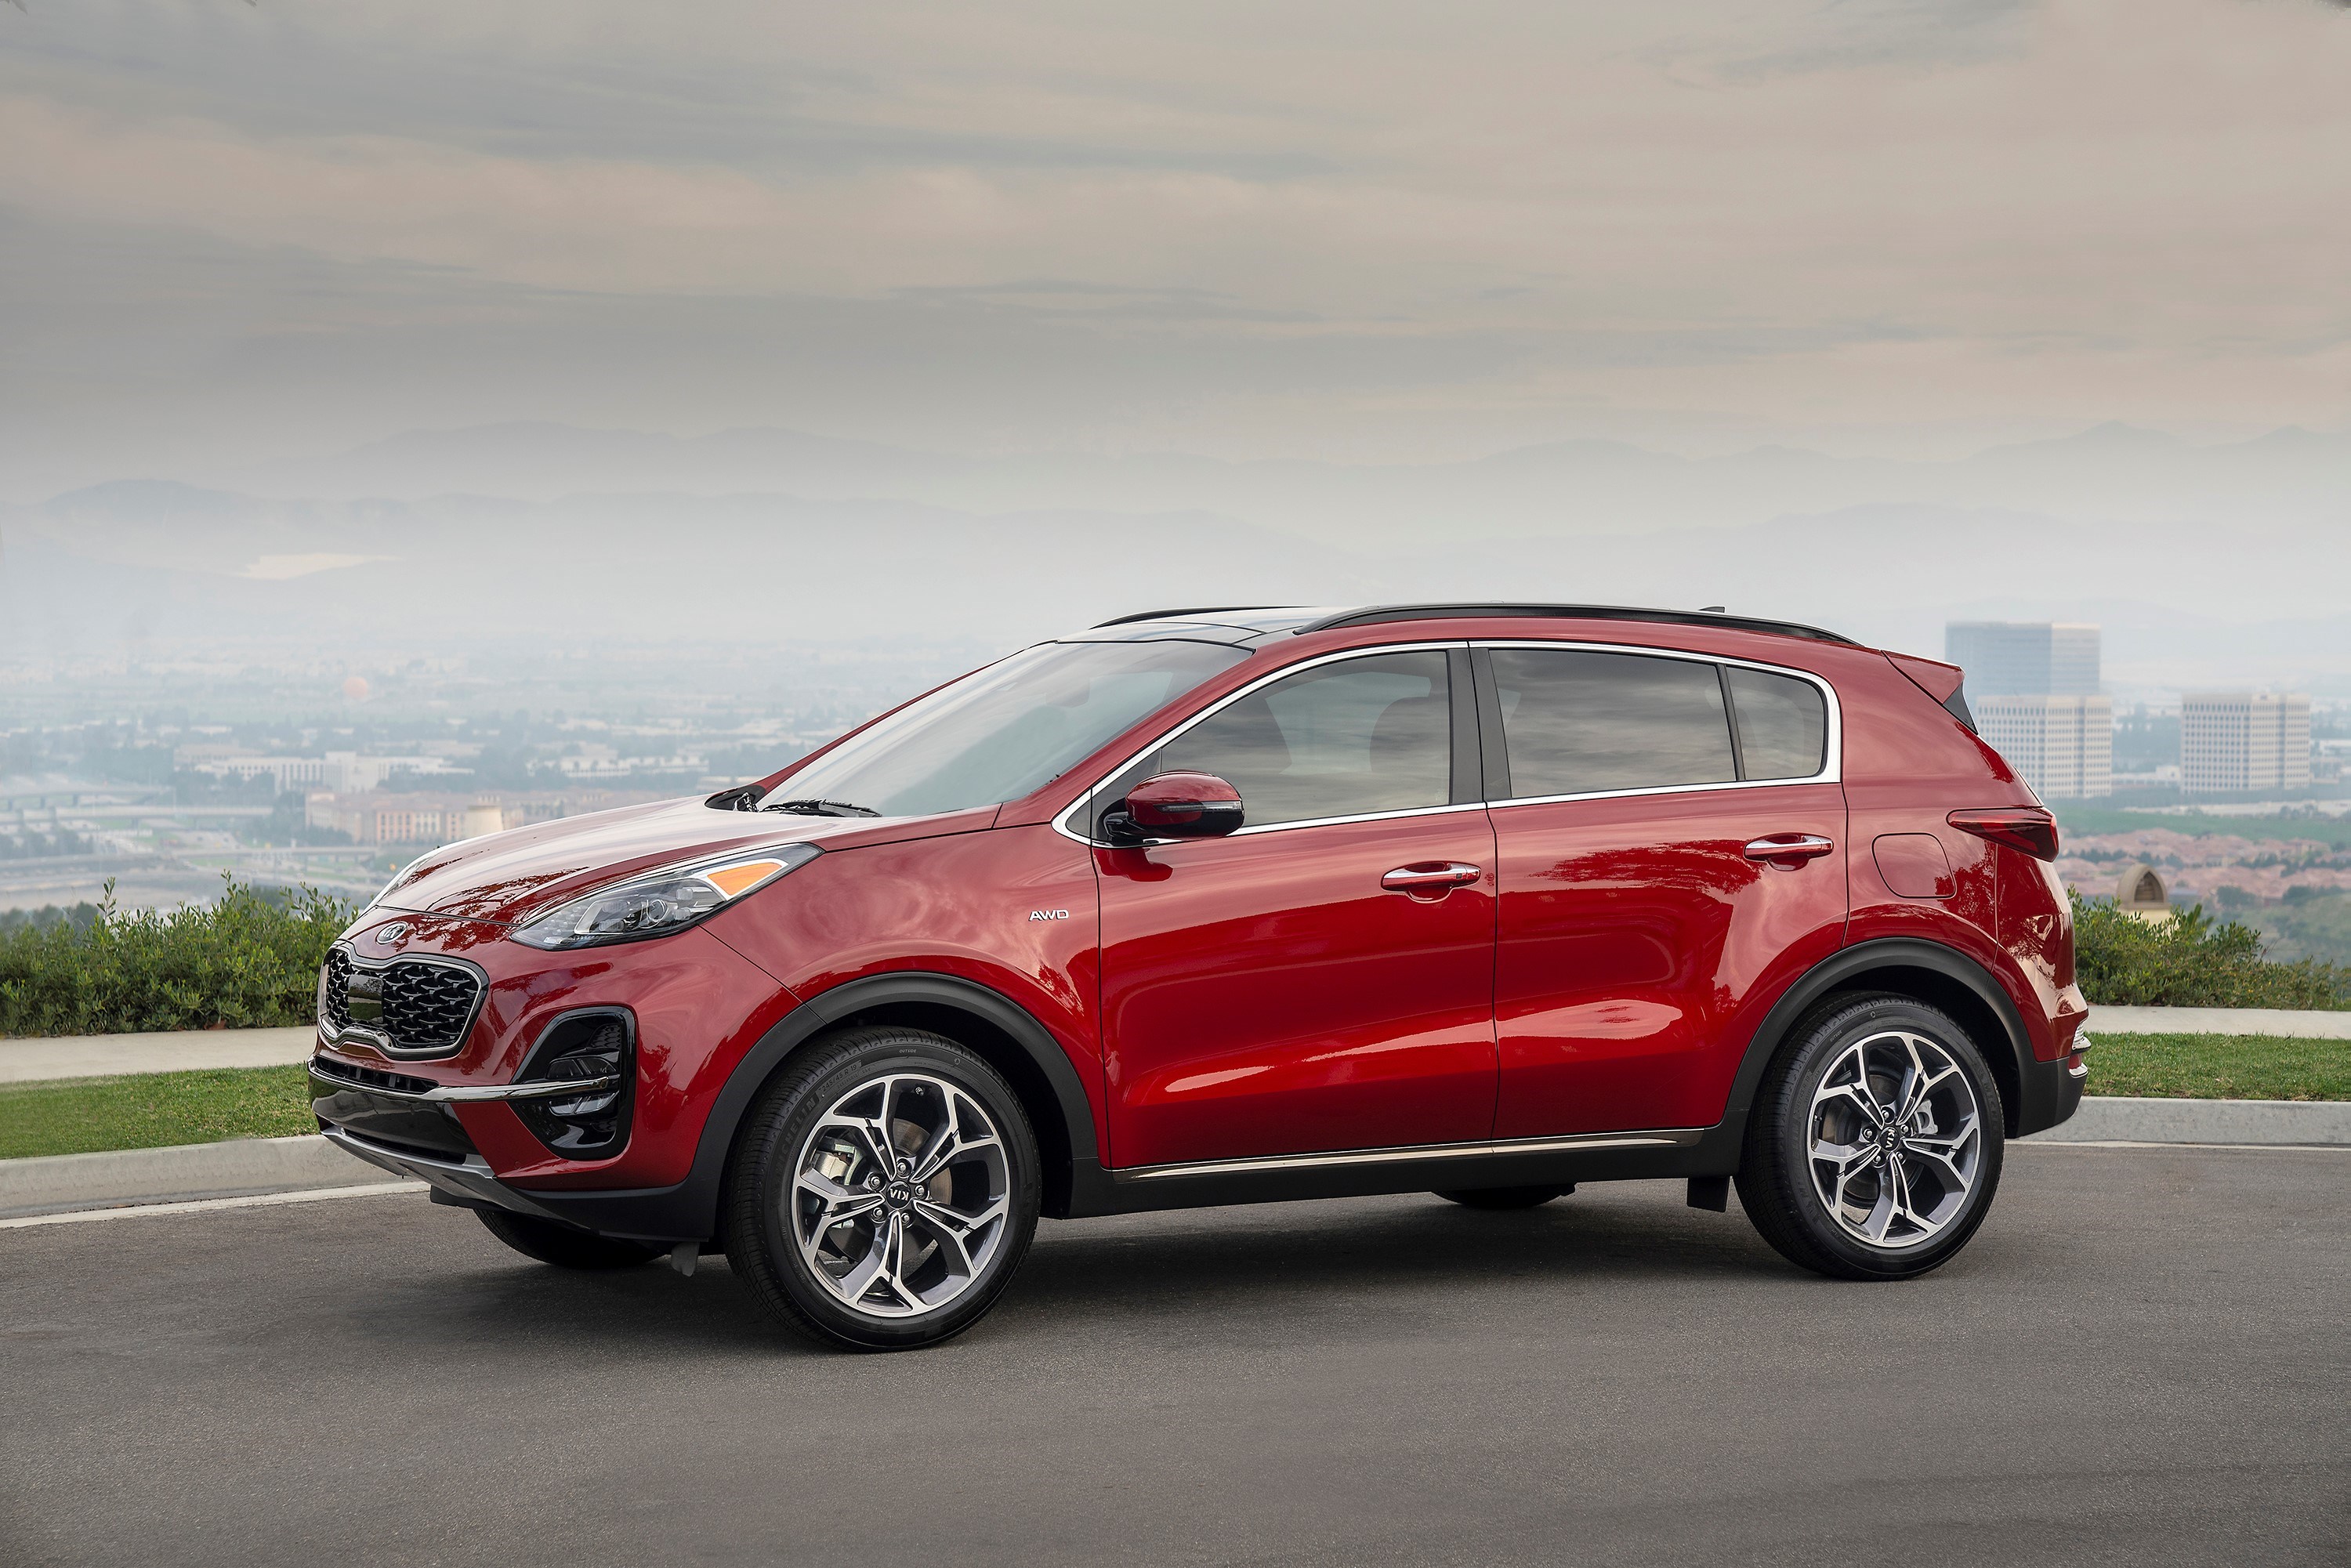 2020 Kia Sportage Review, Ratings, Specs, Prices, and